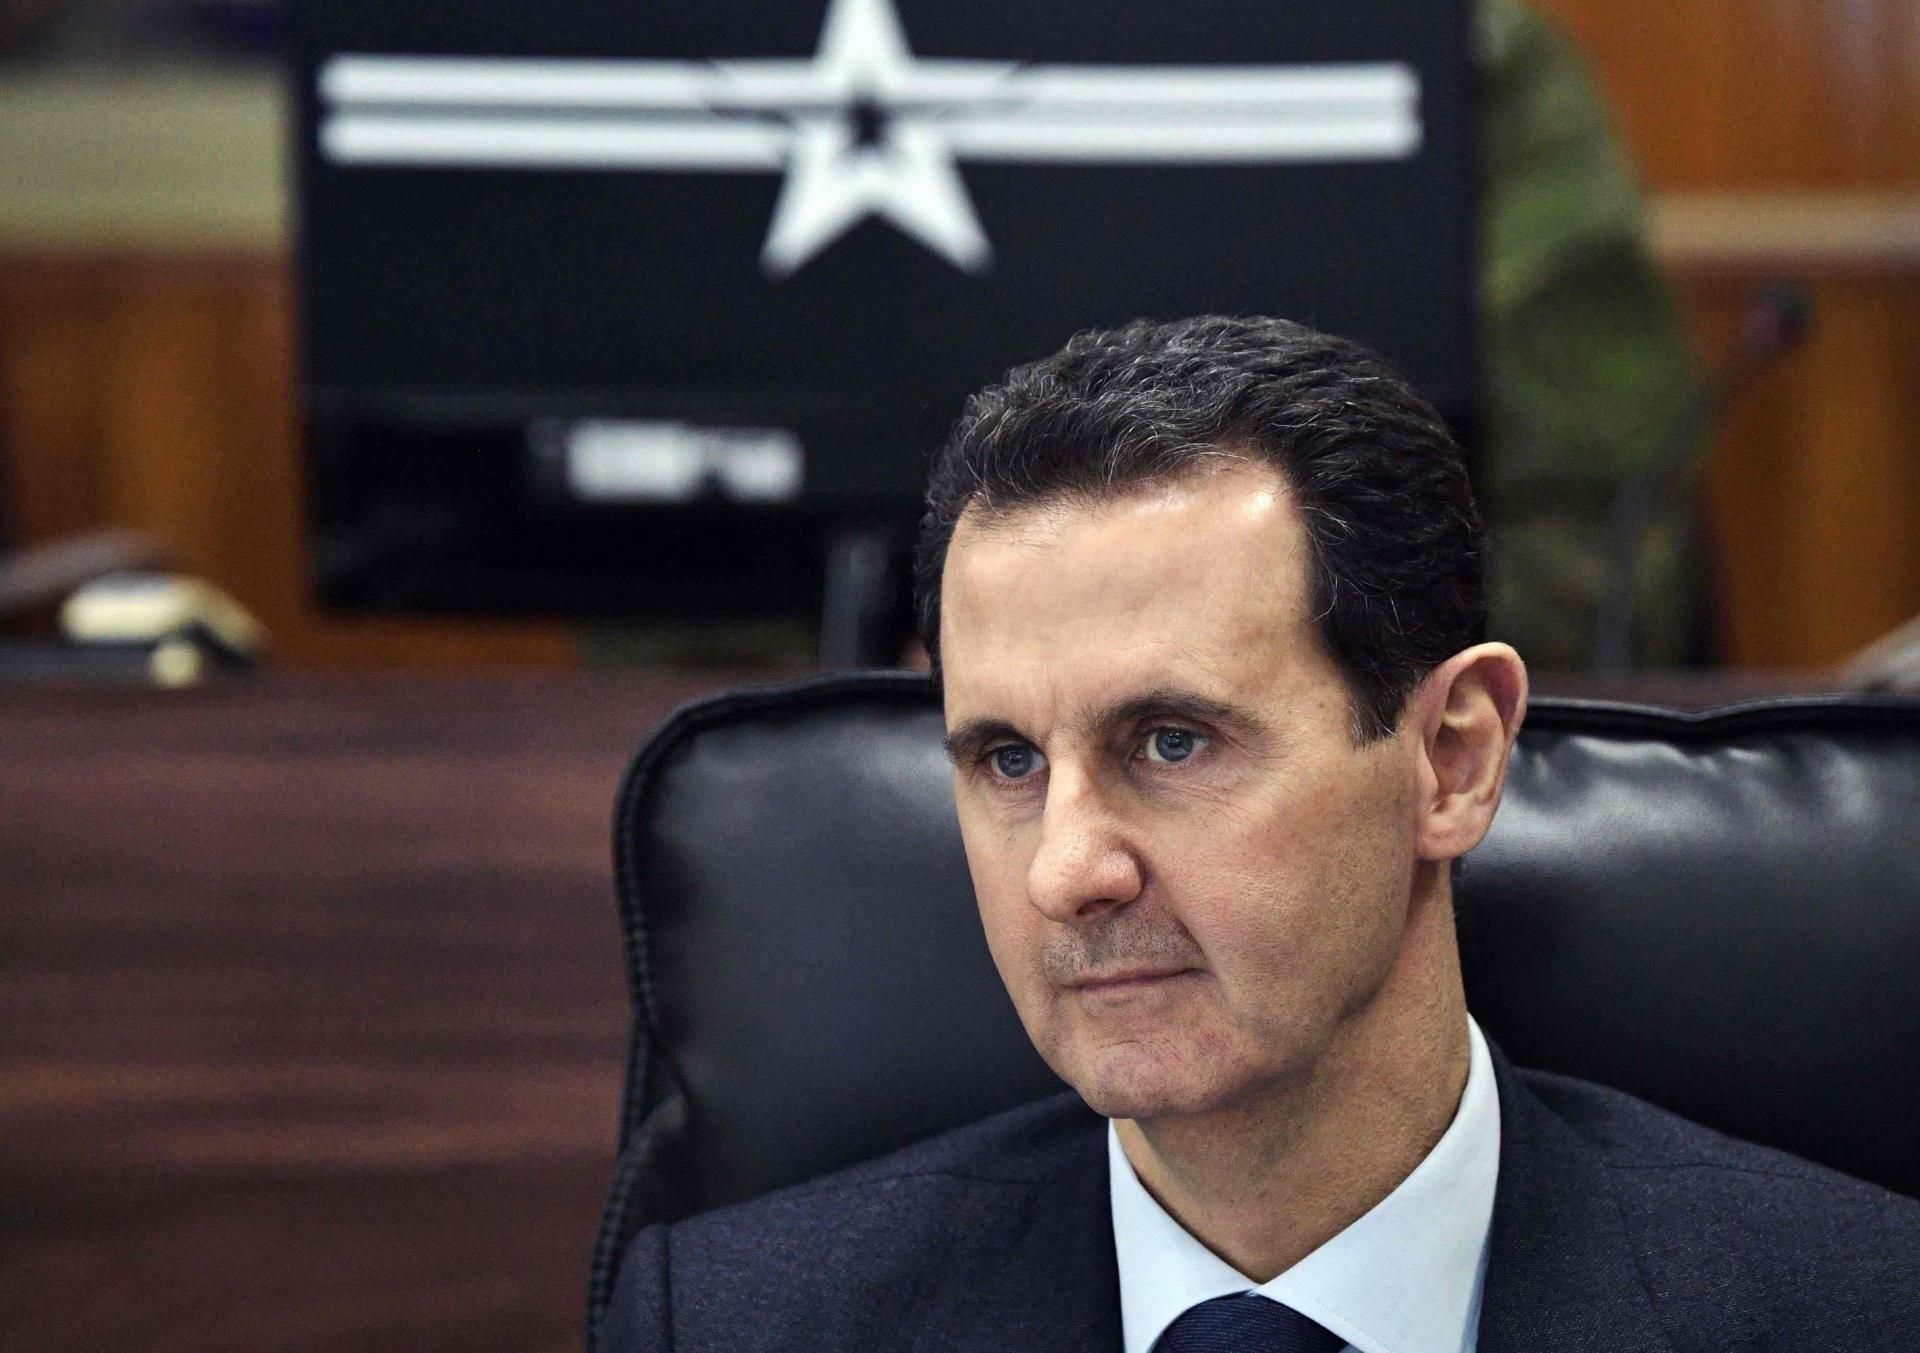 Efforts to prosecute members of Assad's government have failed because Syria is not a signatory to the Rome Statute of the International Criminal Court